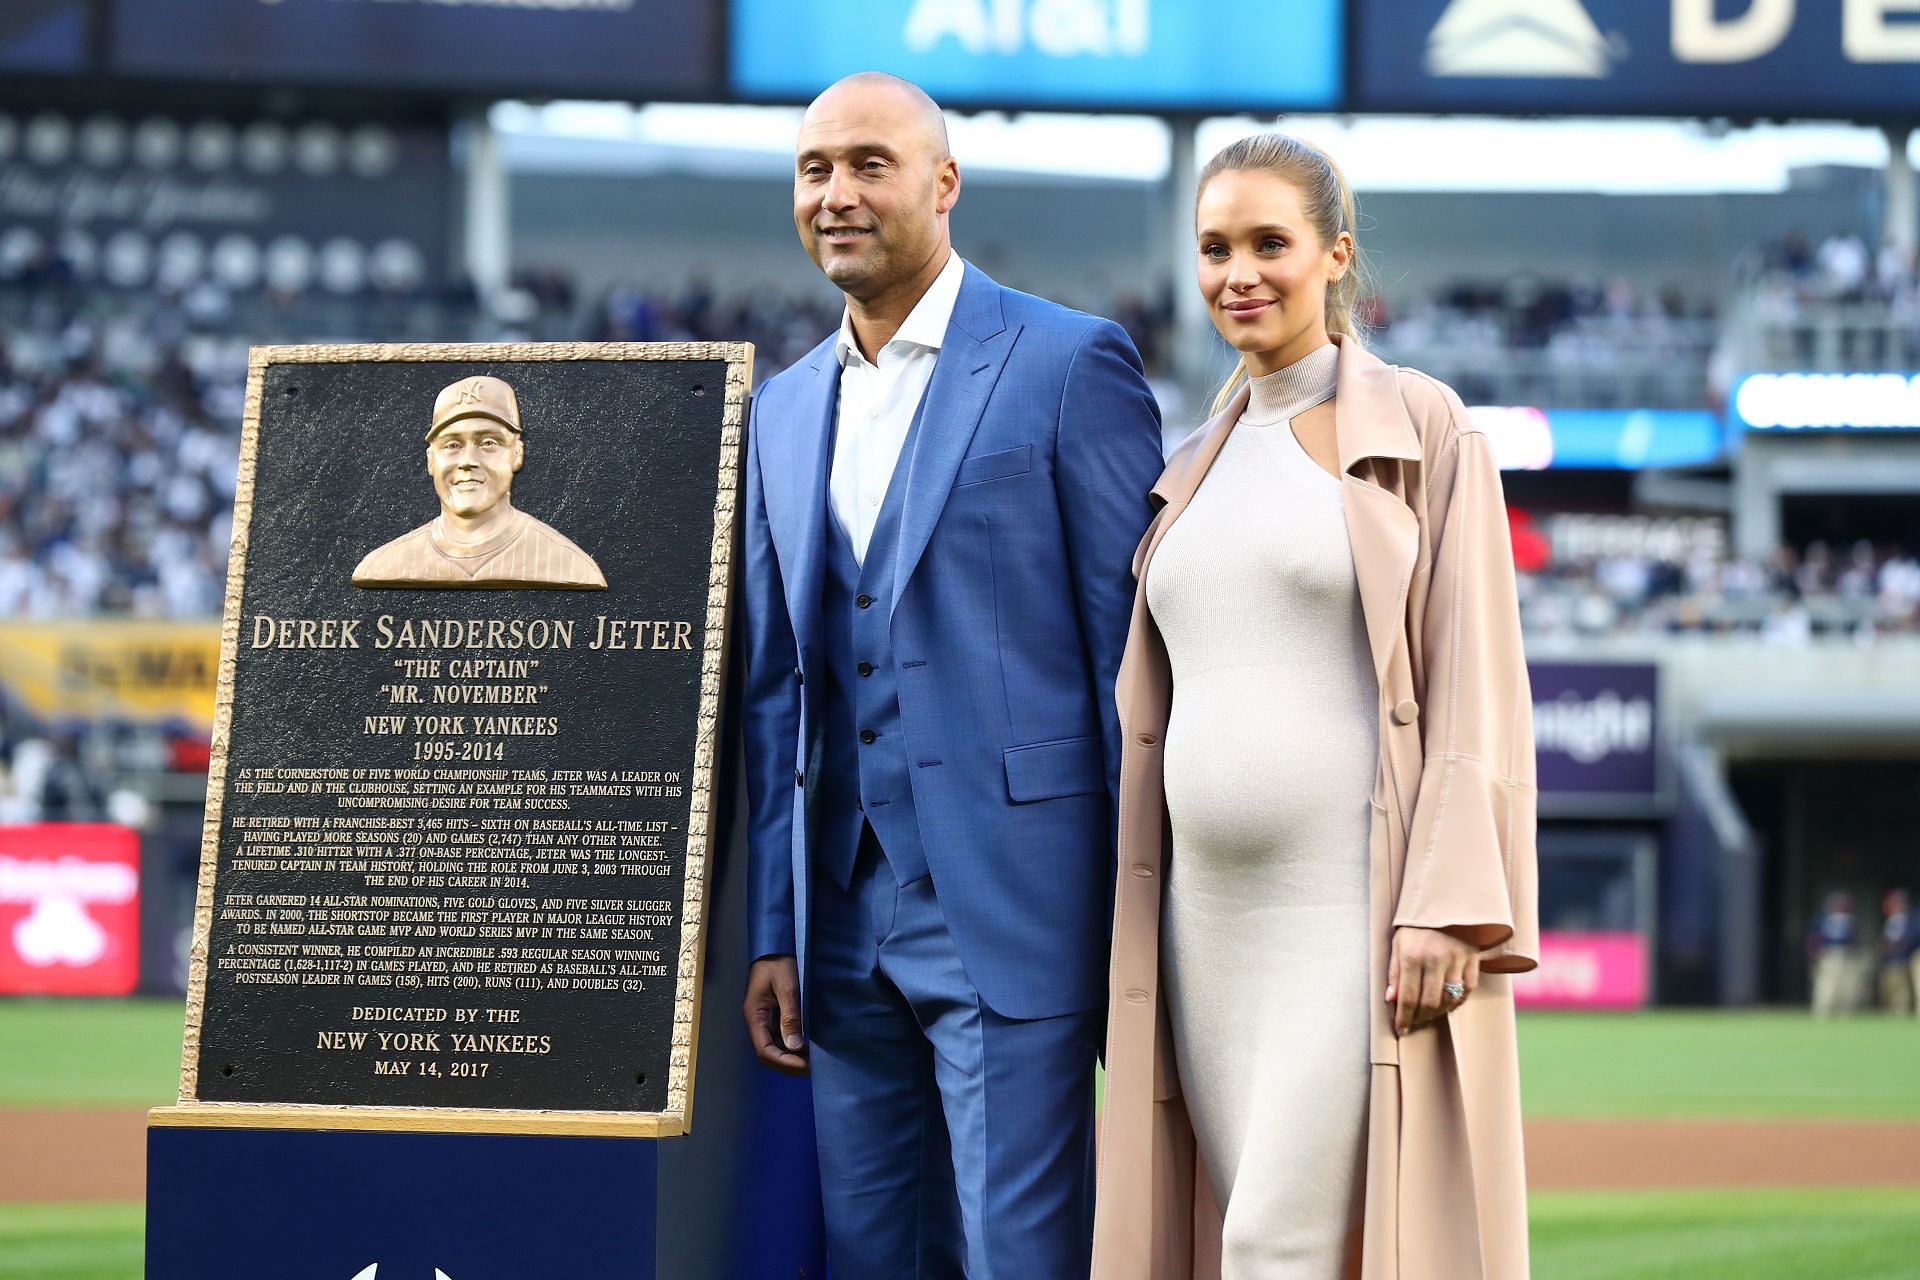 Derek Jeter poses with his wife Hannah Davis at Yankee Stadium on May 14, 2017 during the retiring ceremony for his number 2 jersey.